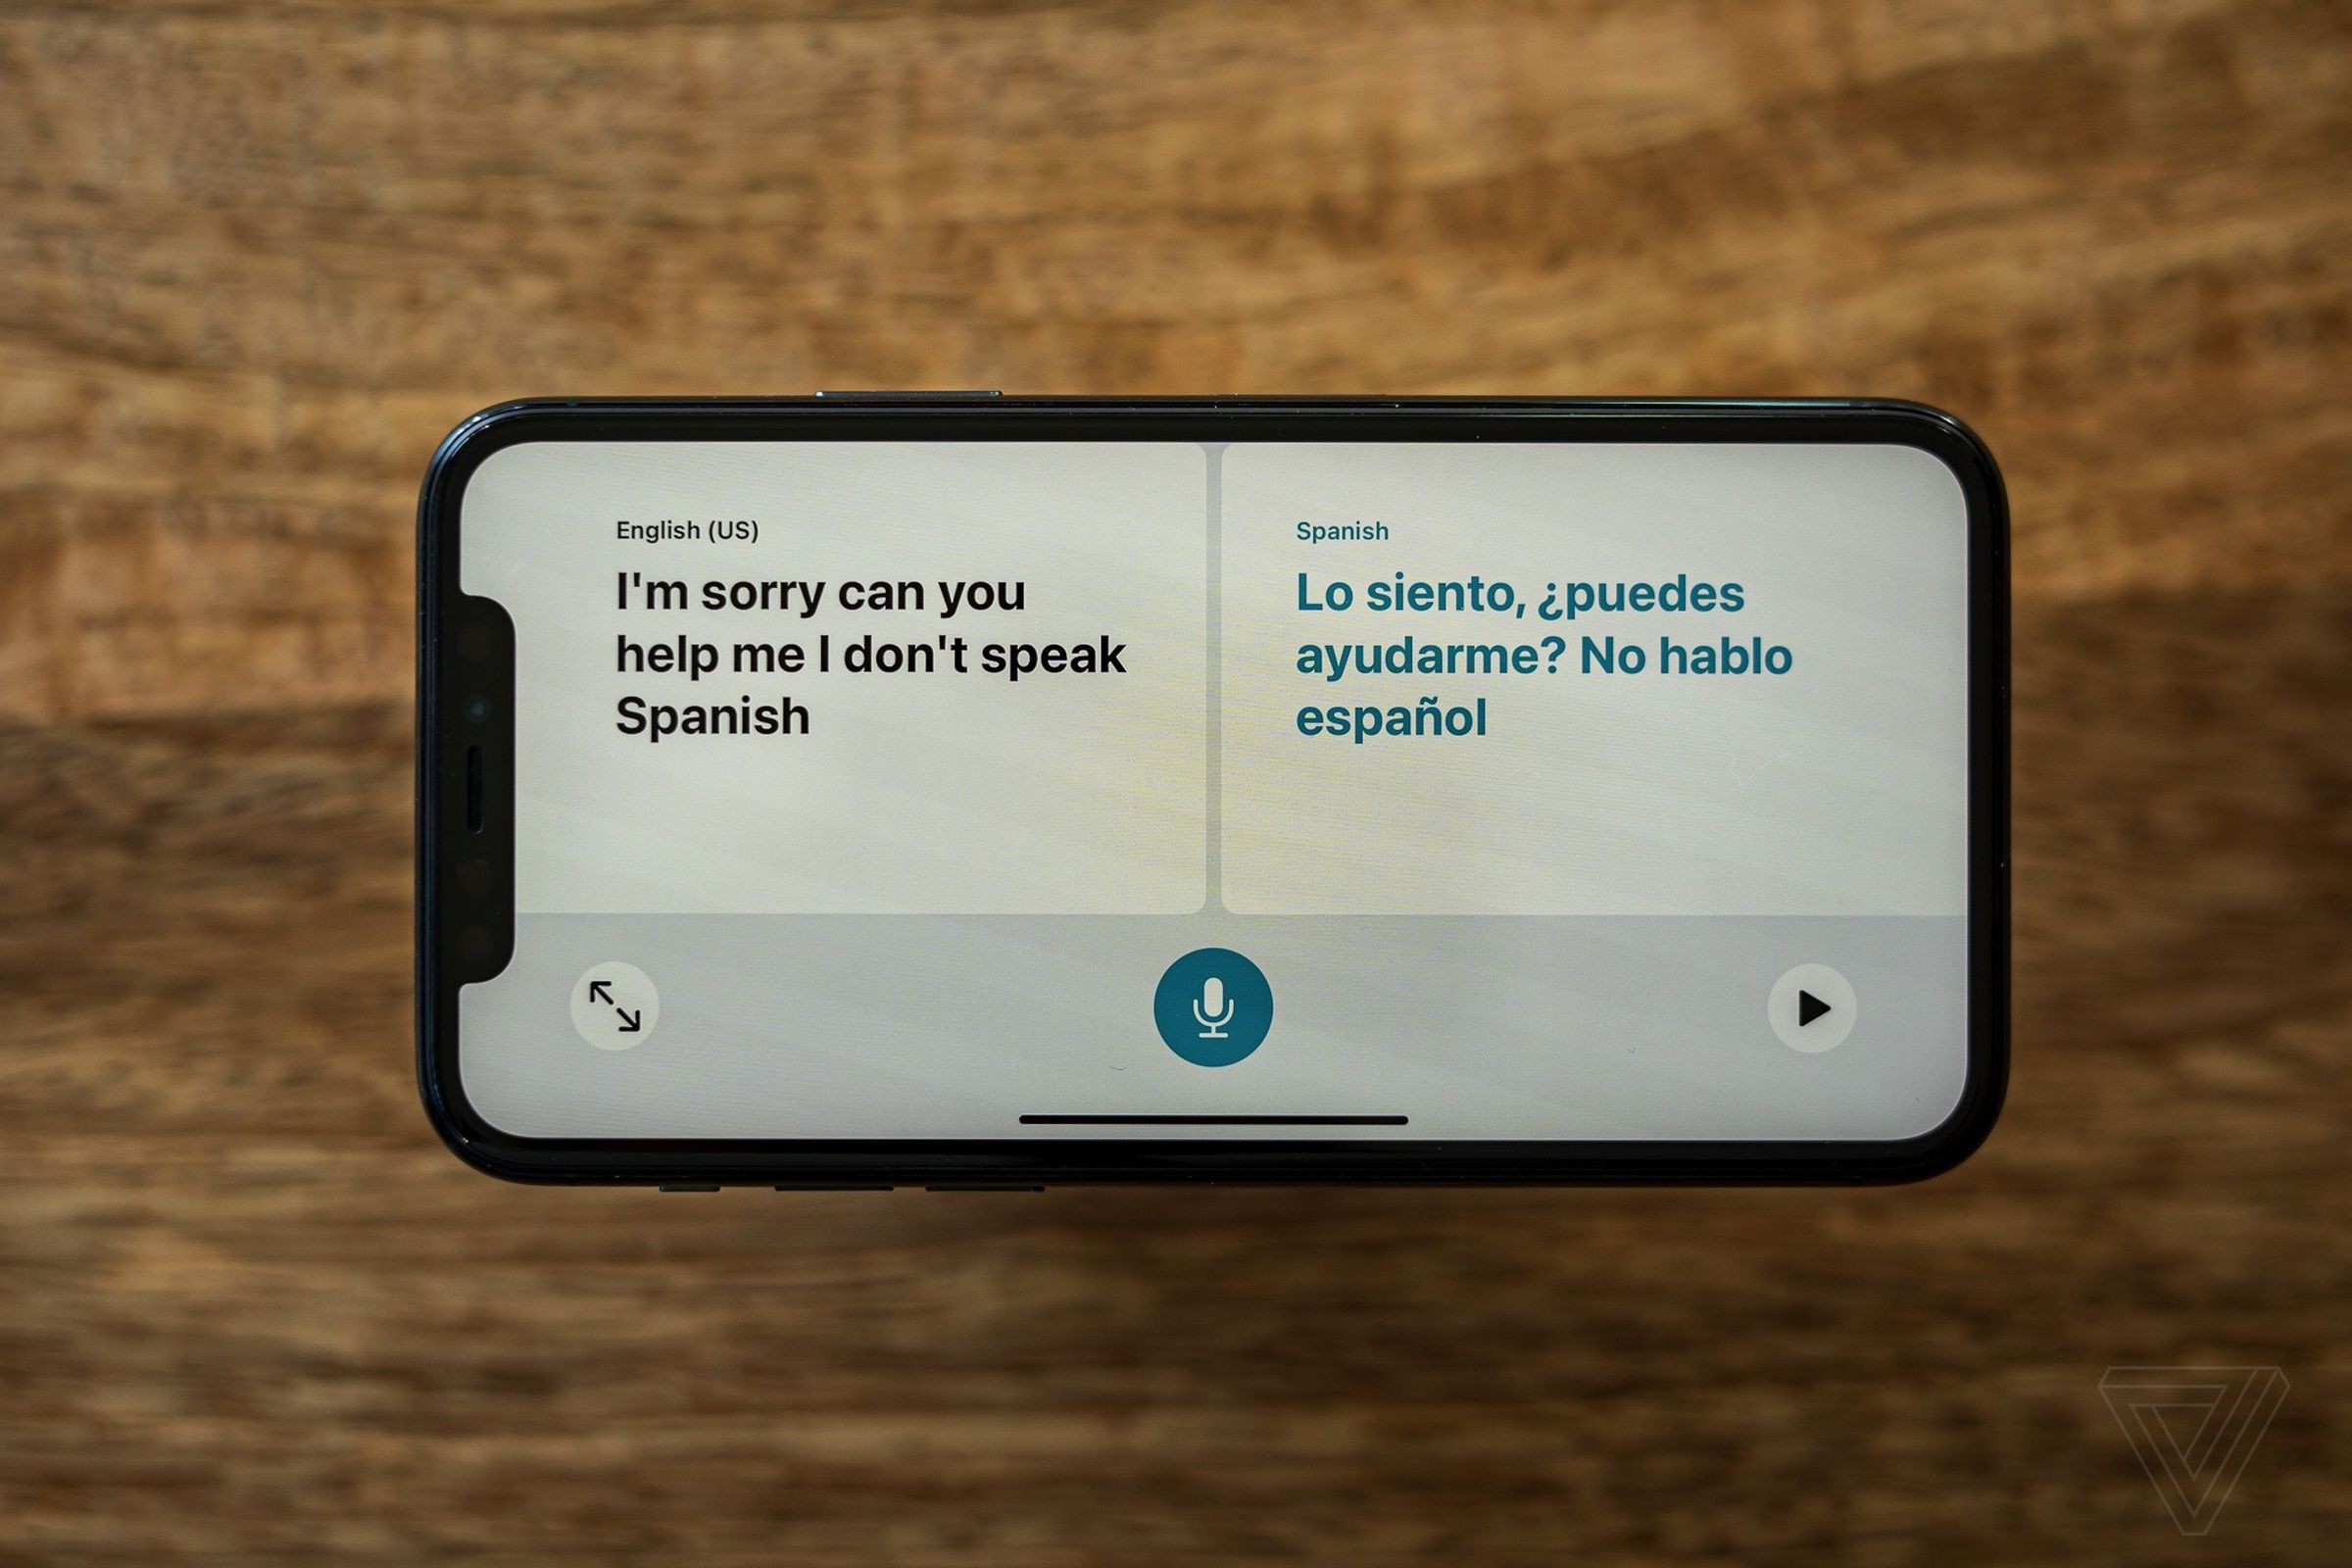 The new Translate app from Apple